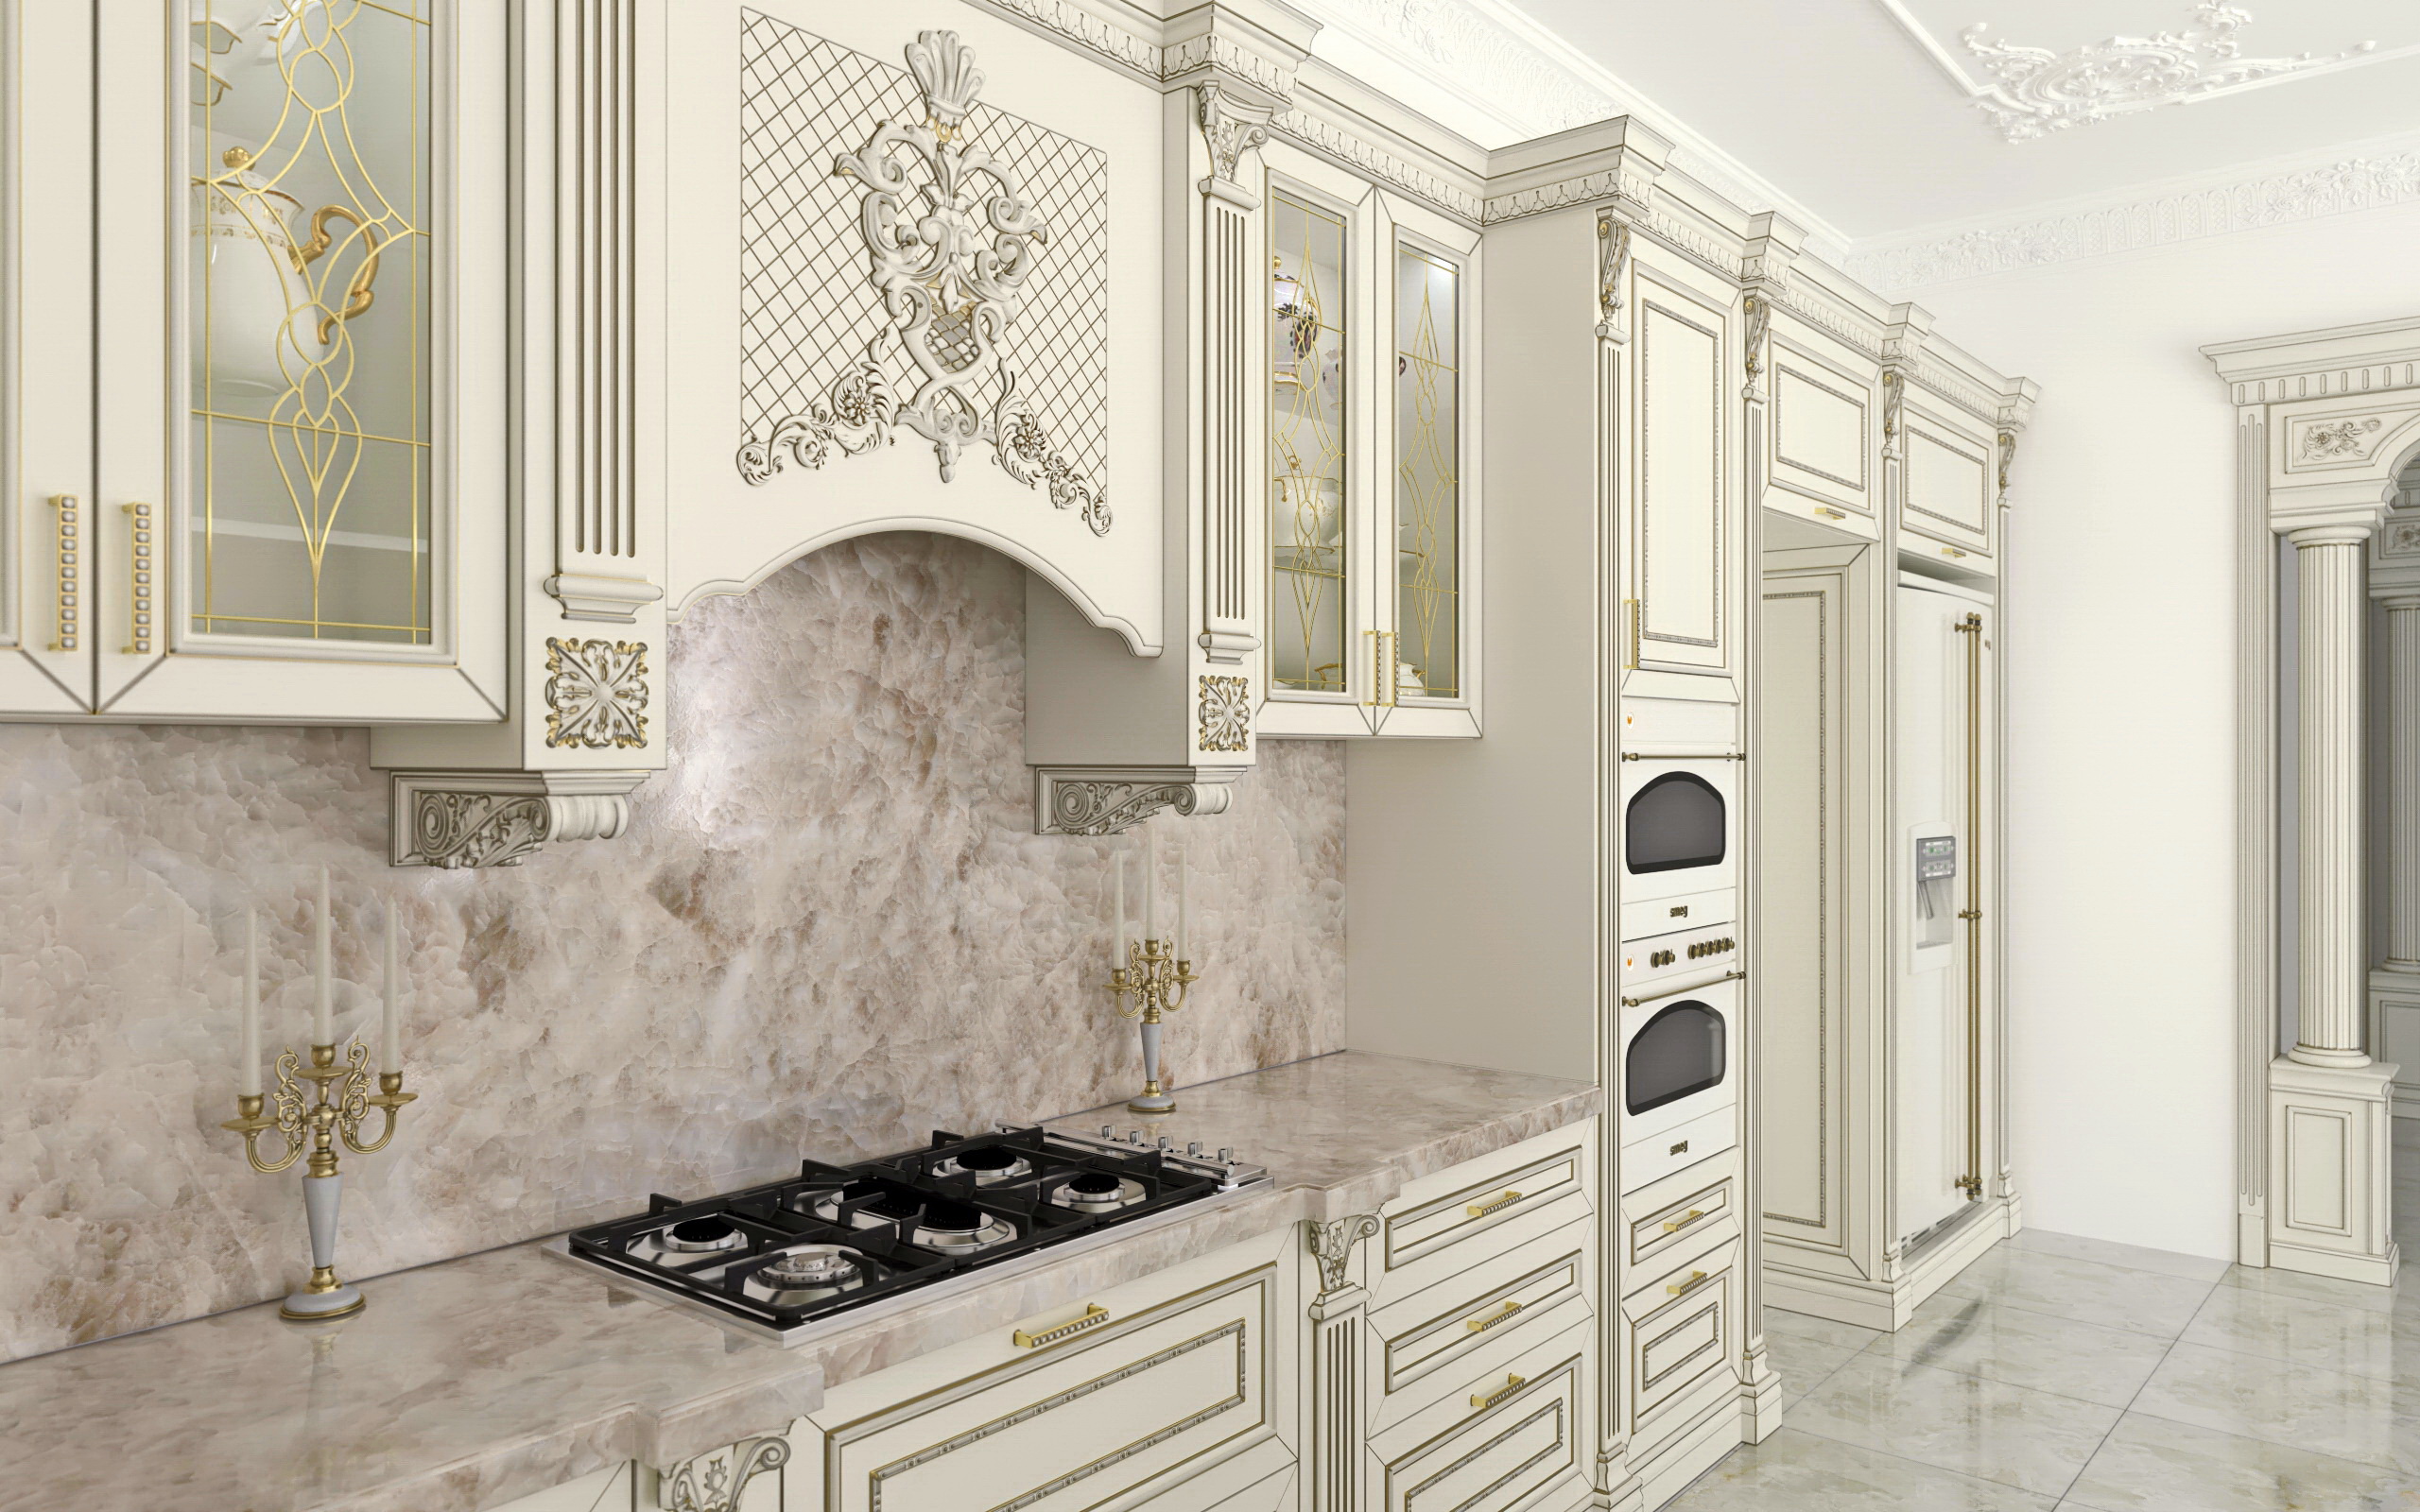 Kitchen-Beautiful house in SolidWorks vray 3.0 image